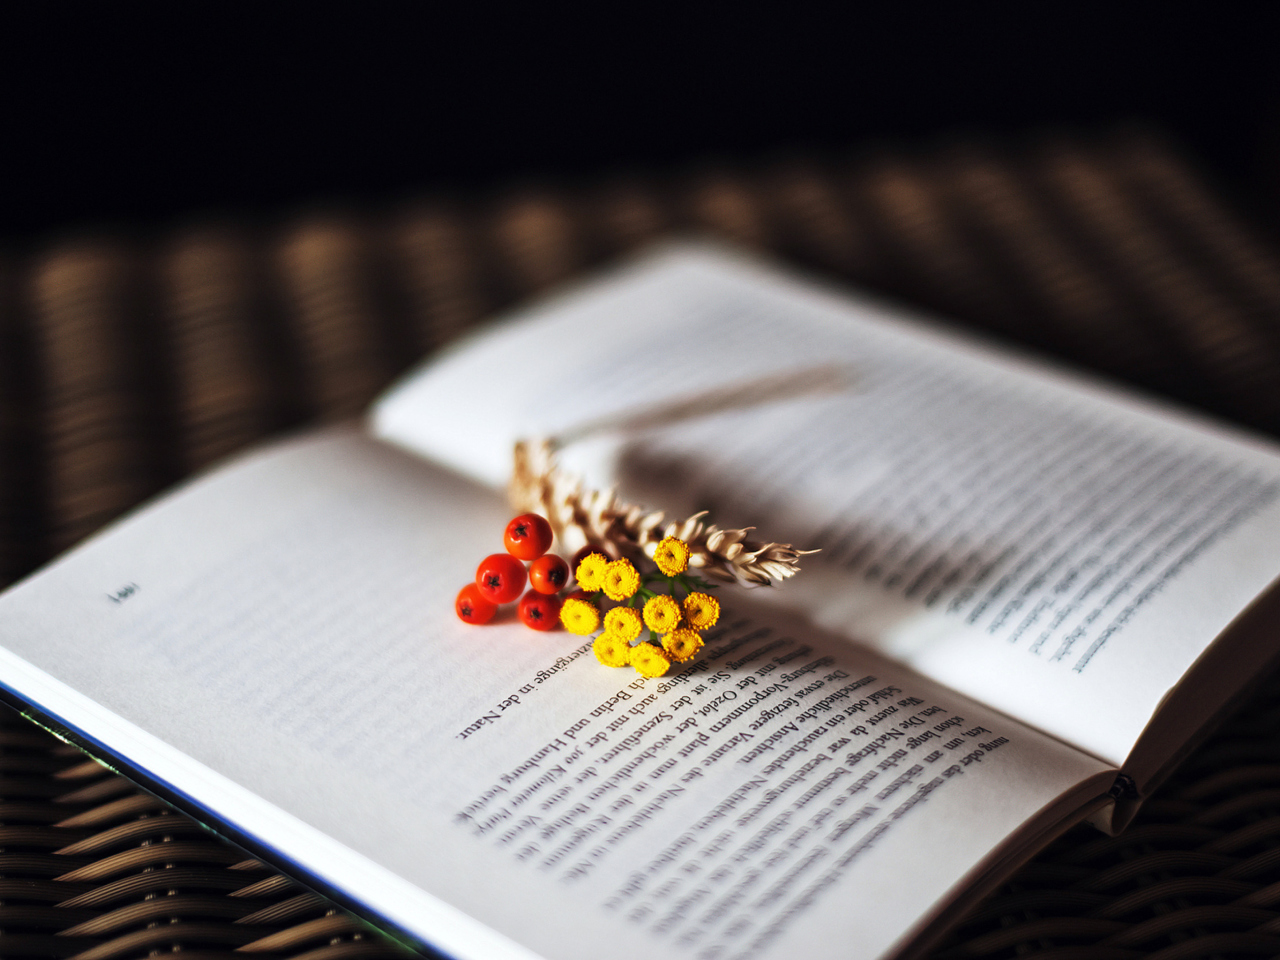 Berries And Flowers On Book screenshot #1 1280x960